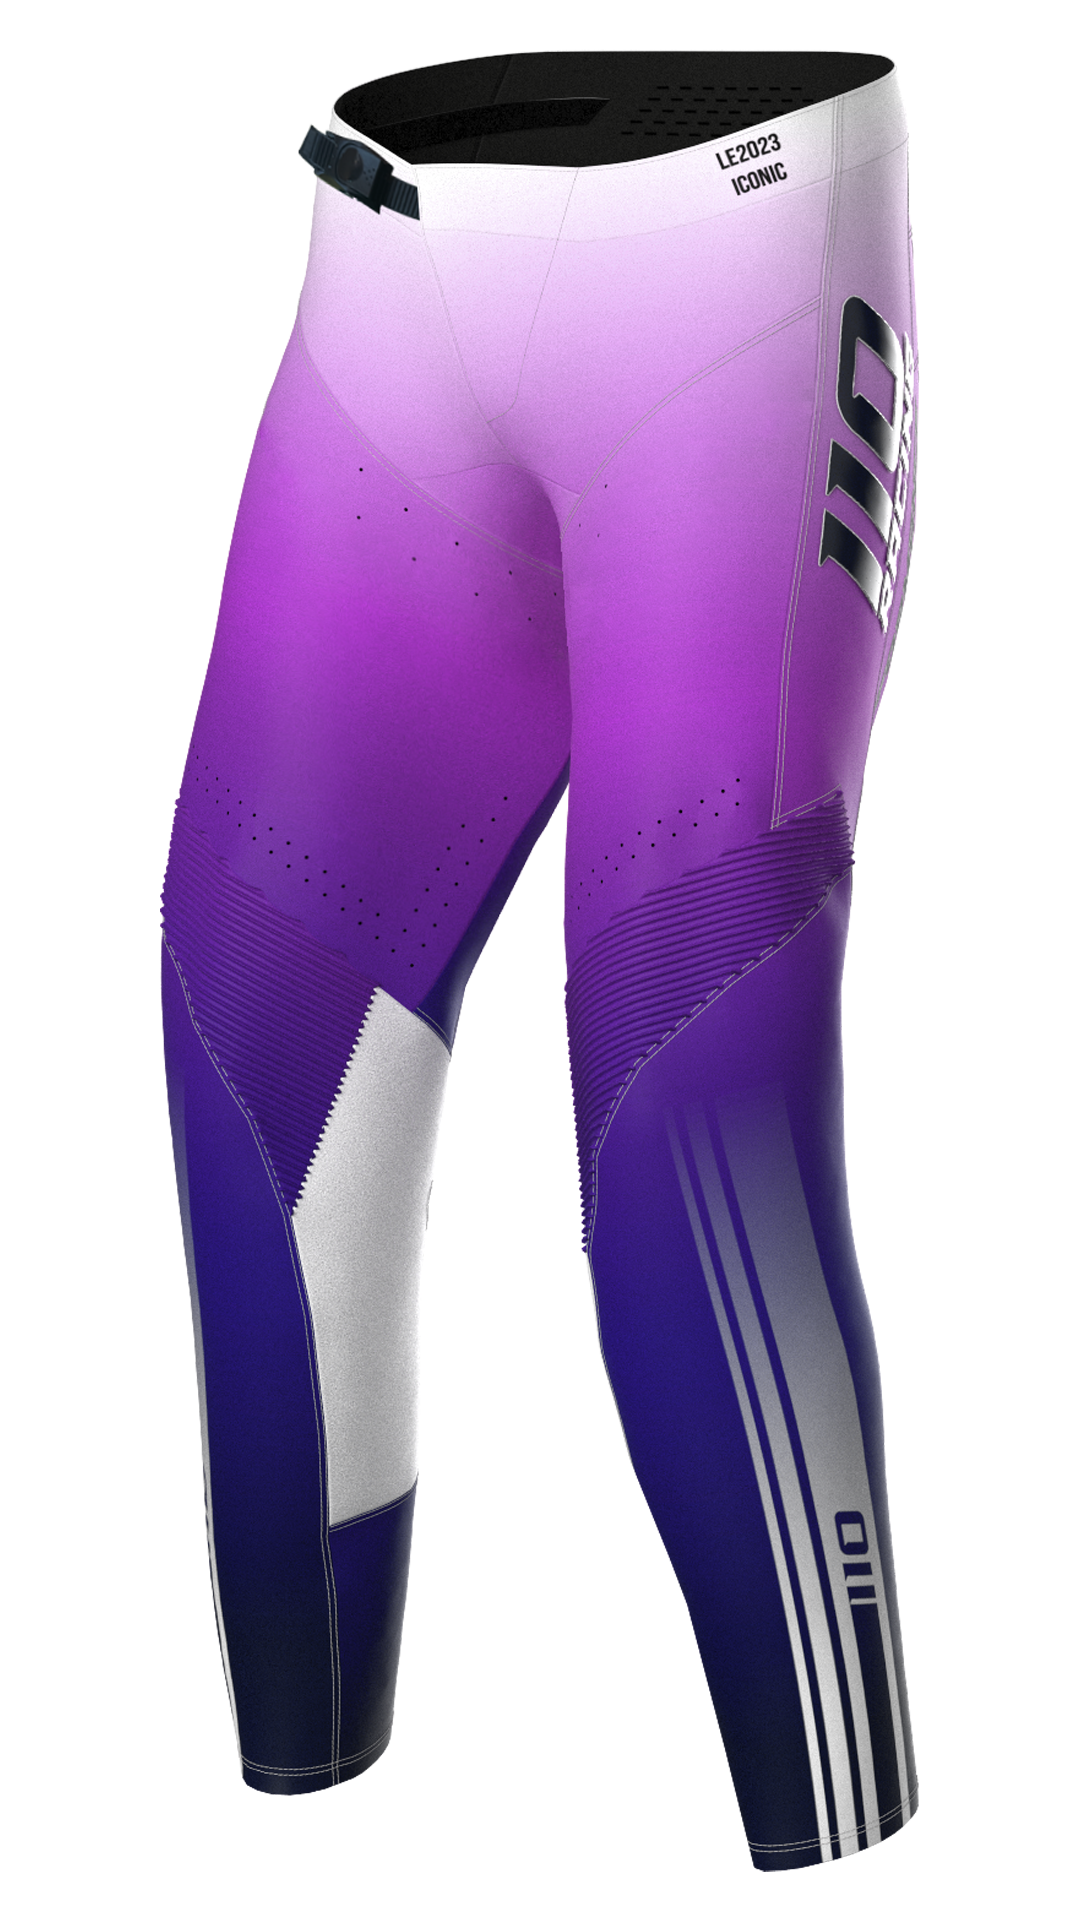 110 RACING // LE23 ICONIC YOUTH PANT - PURPLE